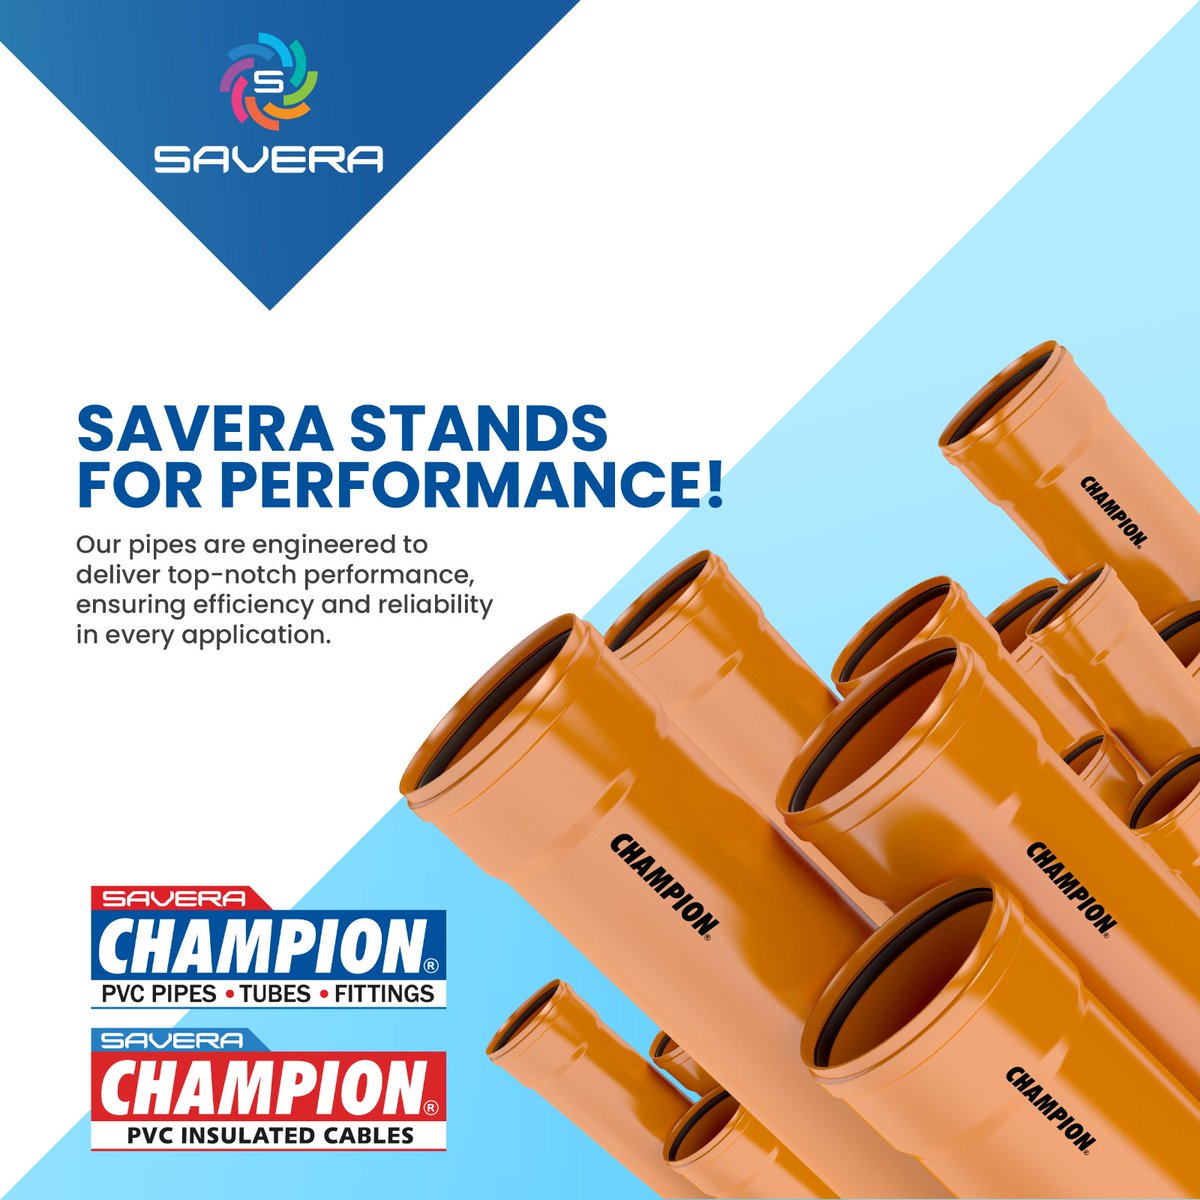 Elevate your standards with Savera – where performance meets perfection. Experience unmatched quality and reliability in every aspect. Trust Savera to deliver excellence in all endeavors. #SaveraPerformance #ExcellenceUnleashed #saverapipes #championpipes